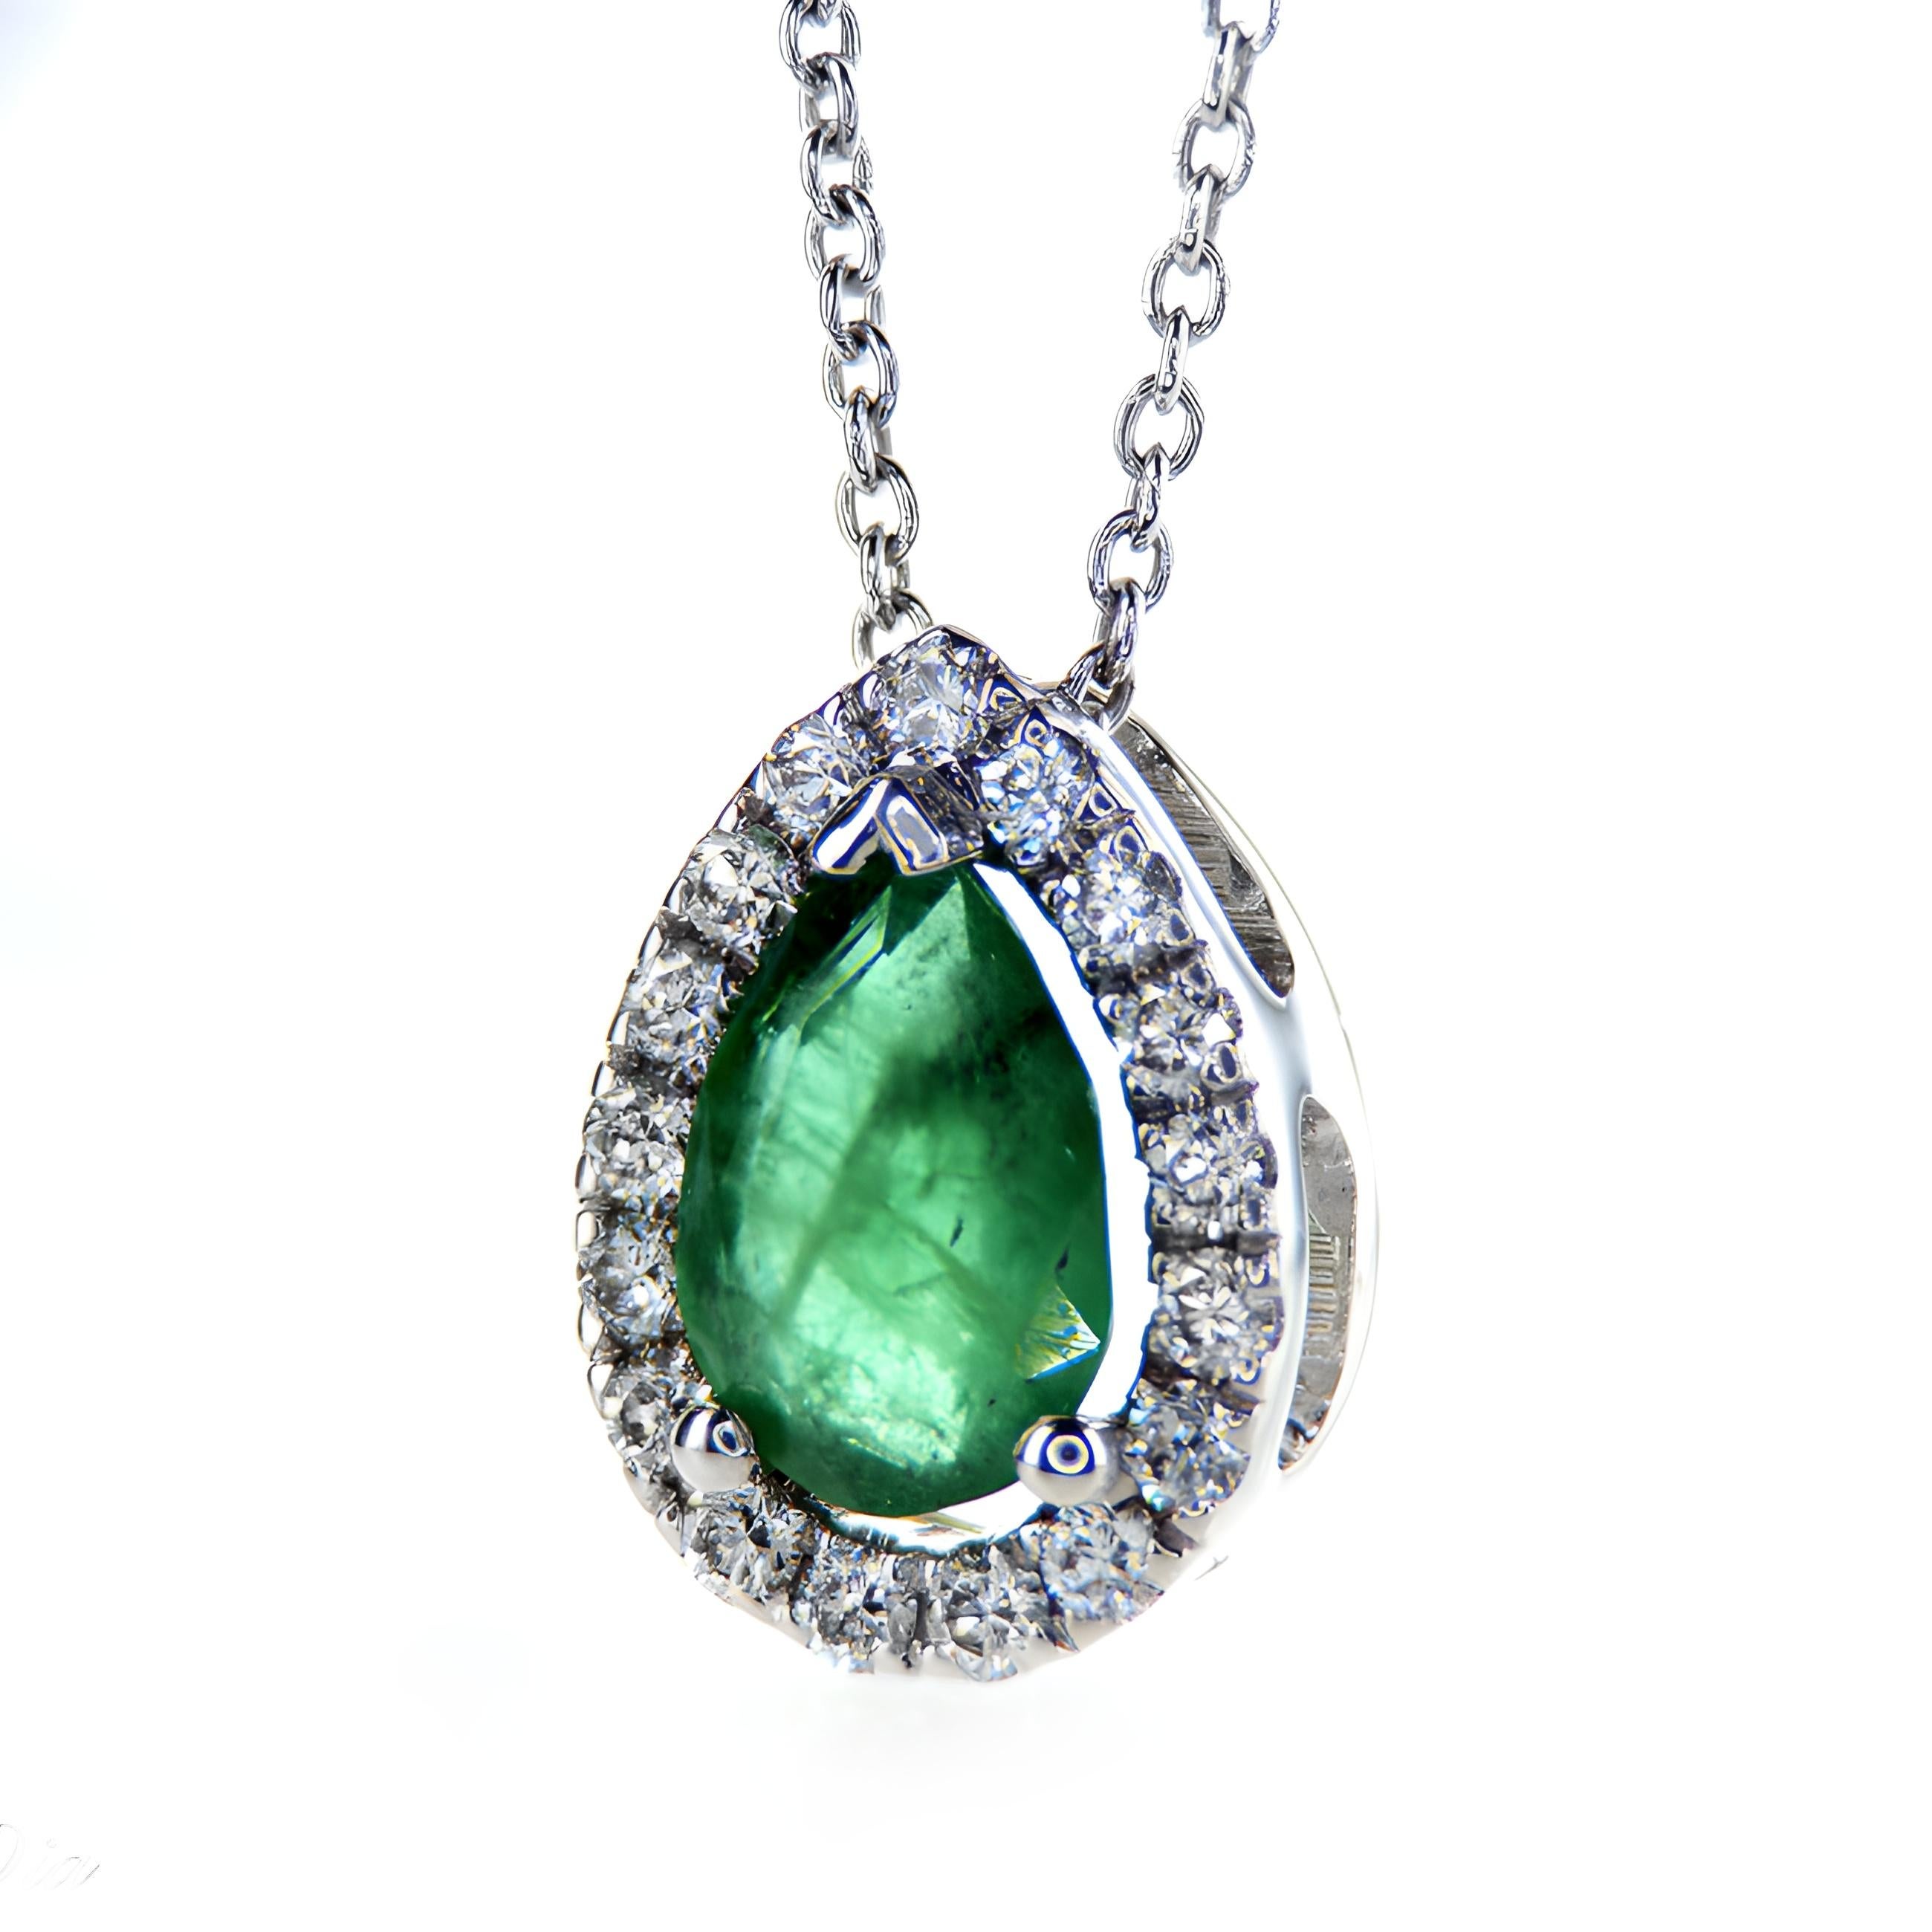 0.53Ct Pear Shape Emerald and 0.14Ct Diamonds Halo 14K White Gold Pendant Necklace

Product Description:

Introducing our Pear Shape Emerald Halo Necklace, a breathtaking creation that marries the elegance of a 0.53Ct pear shape emerald with a halo